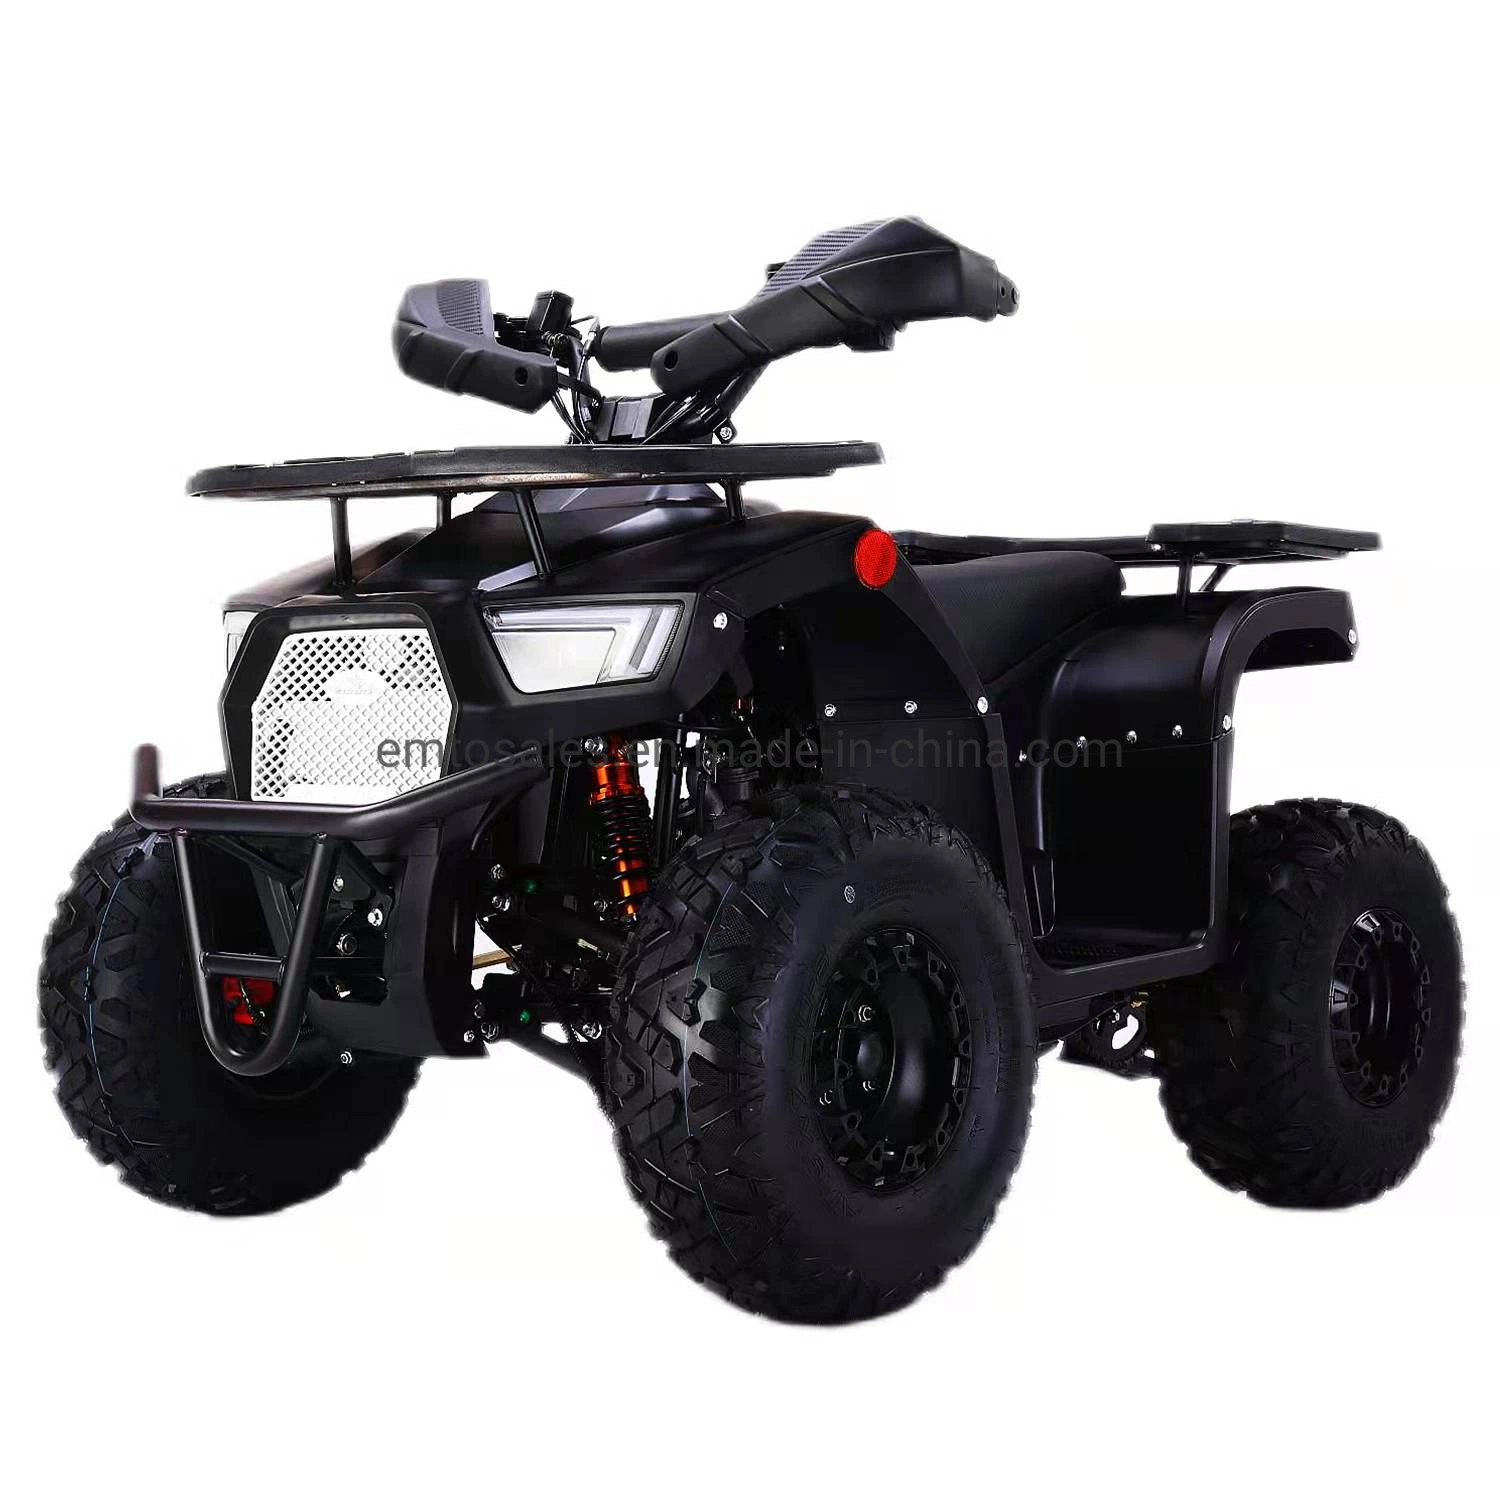 2022 New 125cc Sirius ATV Quad with High quality/High cost performance  Standard CE Approval